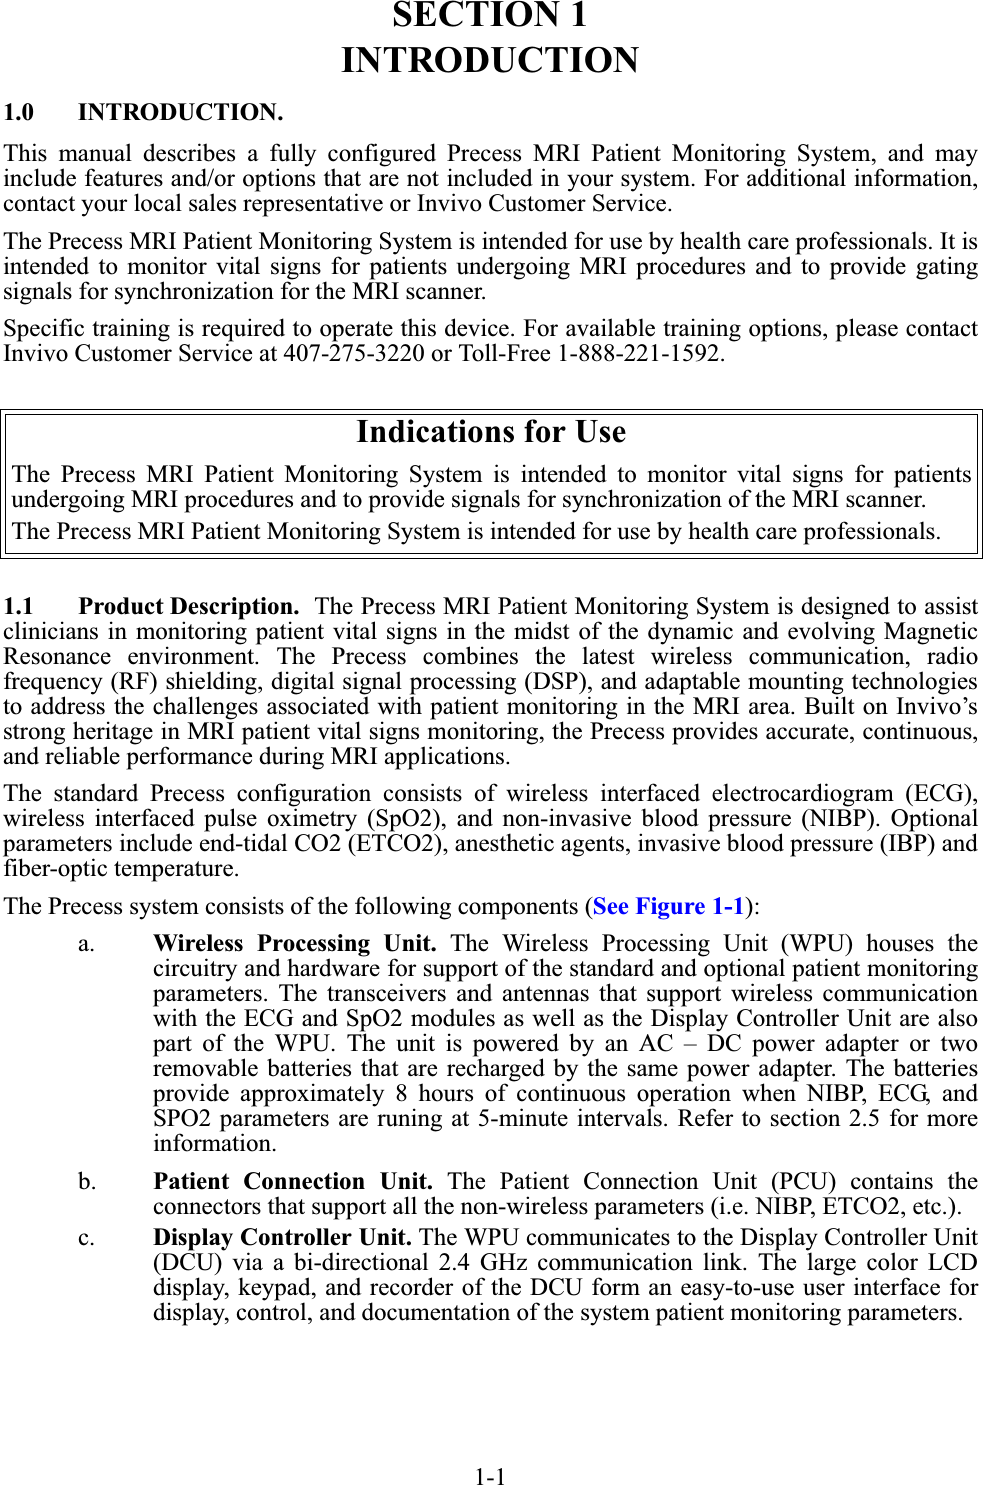 1-1SECTION 1INTRODUCTION1.0 INTRODUCTION.This manual describes a fully configured Precess MRI Patient Monitoring System, and mayinclude features and/or options that are not included in your system. For additional information,contact your local sales representative or Invivo Customer Service.The Precess MRI Patient Monitoring System is intended for use by health care professionals. It isintended to monitor vital signs for patients undergoing MRI procedures and to provide gatingsignals for synchronization for the MRI scanner.Specific training is required to operate this device. For available training options, please contactInvivo Customer Service at 407-275-3220 or Toll-Free 1-888-221-1592.1.1 Product Description.  The Precess MRI Patient Monitoring System is designed to assistclinicians in monitoring patient vital signs in the midst of the dynamic and evolving MagneticResonance environment. The Precess combines the latest wireless communication, radiofrequency (RF) shielding, digital signal processing (DSP), and adaptable mounting technologiesto address the challenges associated with patient monitoring in the MRI area. Built on Invivo’sstrong heritage in MRI patient vital signs monitoring, the Precess provides accurate, continuous,and reliable performance during MRI applications.The standard Precess configuration consists of wireless interfaced electrocardiogram (ECG),wireless interfaced pulse oximetry (SpO2), and non-invasive blood pressure (NIBP). Optionalparameters include end-tidal CO2 (ETCO2), anesthetic agents, invasive blood pressure (IBP) andfiber-optic temperature.The Precess system consists of the following components (See Figure 1-1):a. Wireless Processing Unit. The Wireless Processing Unit (WPU) houses thecircuitry and hardware for support of the standard and optional patient monitoringparameters. The transceivers and antennas that support wireless communicationwith the ECG and SpO2 modules as well as the Display Controller Unit are alsopart of the WPU. The unit is powered by an AC – DC power adapter or tworemovable batteries that are recharged by the same power adapter. The batteriesprovide approximately 8 hours of continuous operation when NIBP, ECG, andSPO2 parameters are runing at 5-minute intervals. Refer to section 2.5 for moreinformation.b. Patient Connection Unit. The Patient Connection Unit (PCU) contains theconnectors that support all the non-wireless parameters (i.e. NIBP, ETCO2, etc.).c. Display Controller Unit. The WPU communicates to the Display Controller Unit(DCU) via a bi-directional 2.4 GHz communication link. The large color LCDdisplay, keypad, and recorder of the DCU form an easy-to-use user interface fordisplay, control, and documentation of the system patient monitoring parameters.Indications for UseThe Precess MRI Patient Monitoring System is intended to monitor vital signs for patientsundergoing MRI procedures and to provide signals for synchronization of the MRI scanner.The Precess MRI Patient Monitoring System is intended for use by health care professionals.